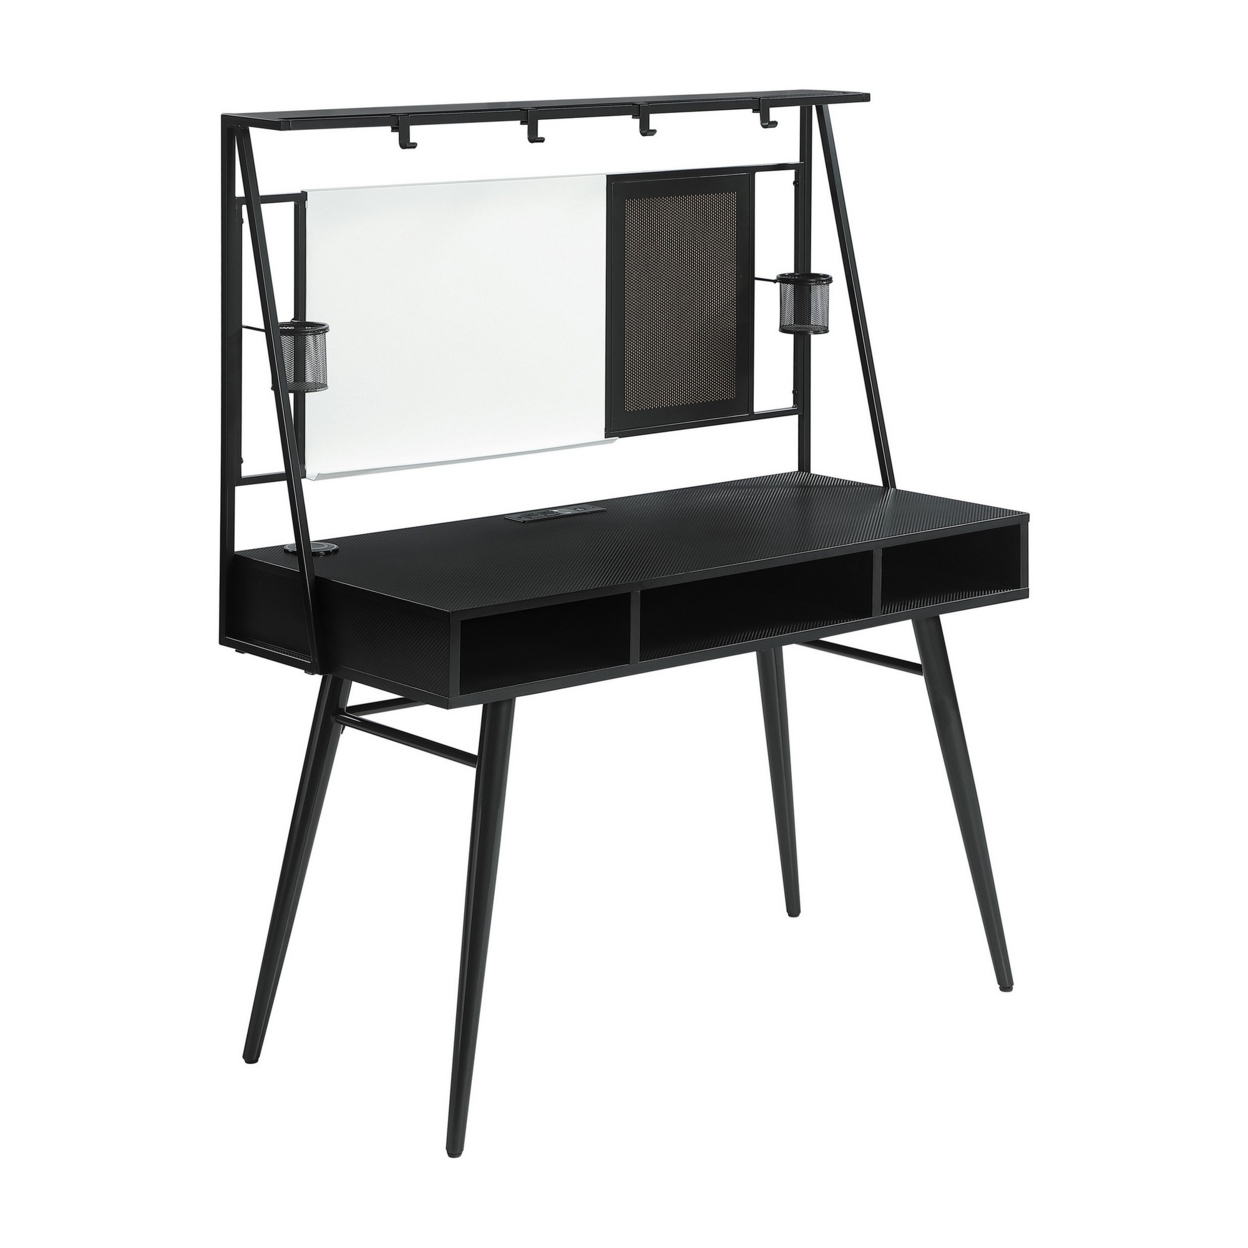 58 Inch Writing Desk With Whiteboard, Cup Holders, USB, Charger, Black- Saltoro Sherpi